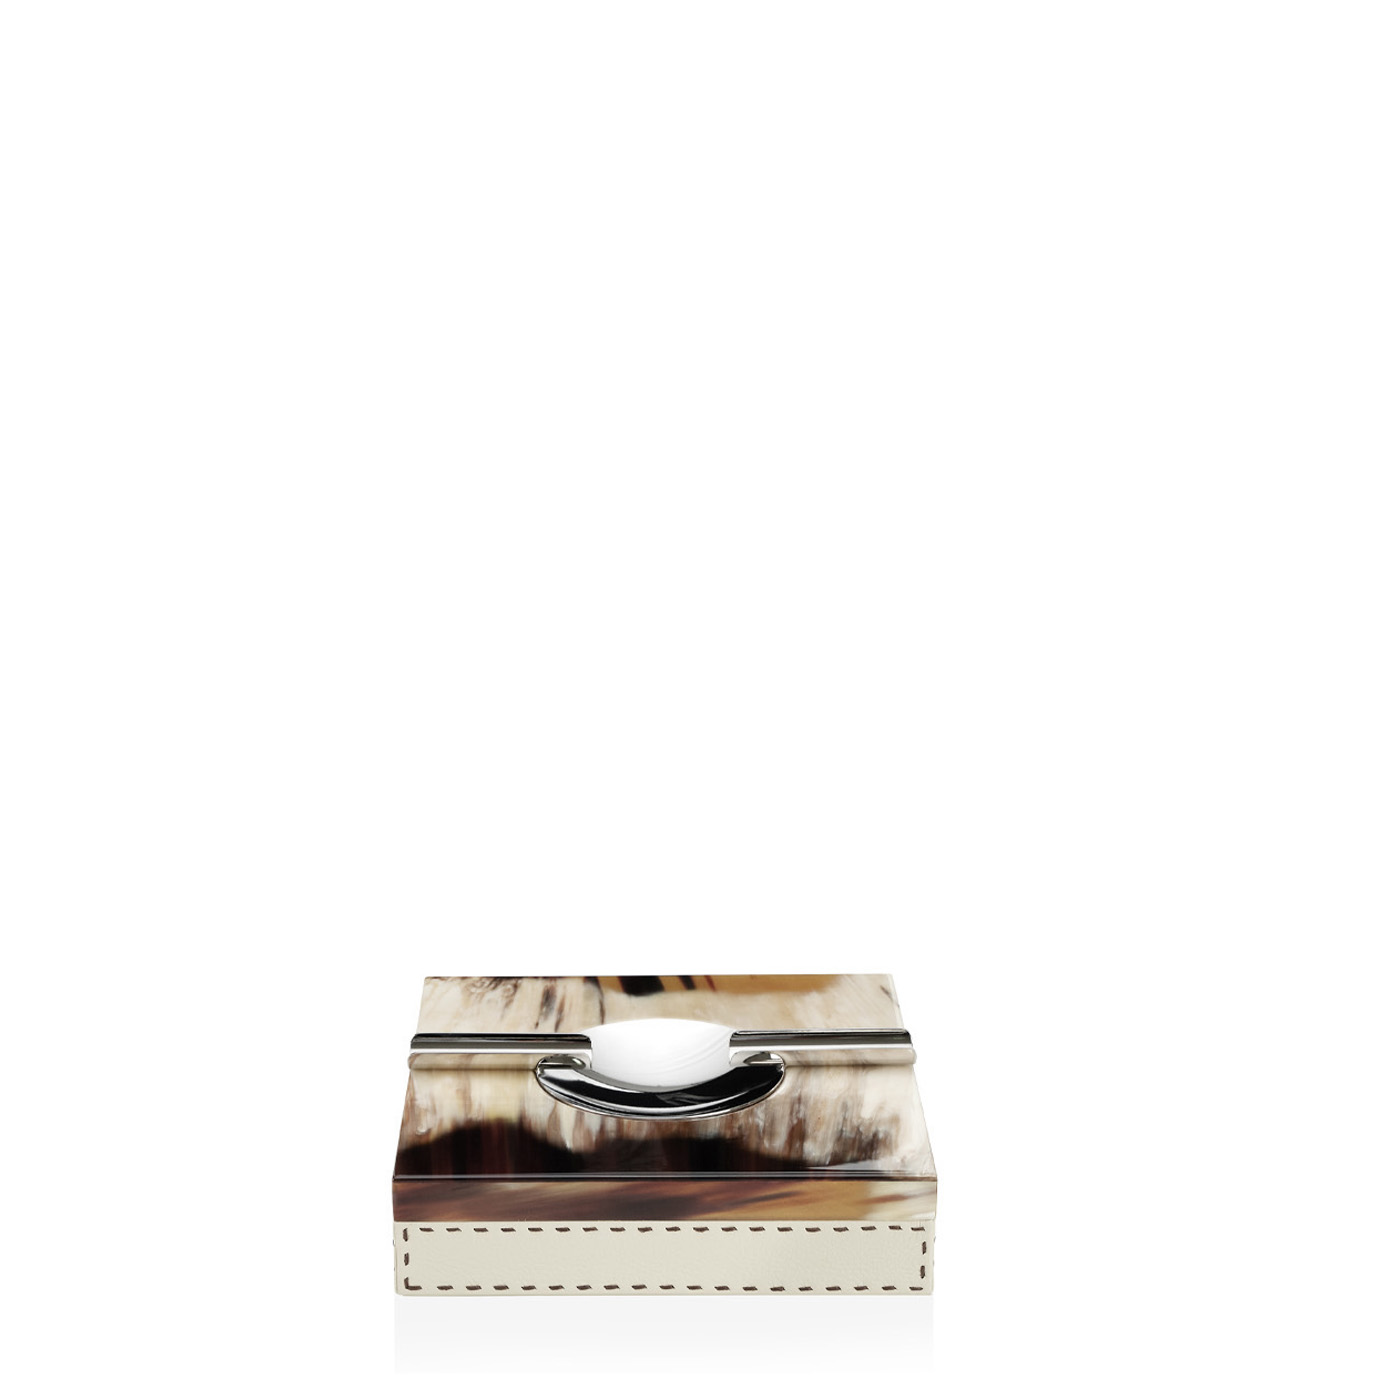 Office sets and smoking accessories – Leandro cigar ash tray in horn and Ice-cream colour pebbled leather mod. 4442 - Arcahorn